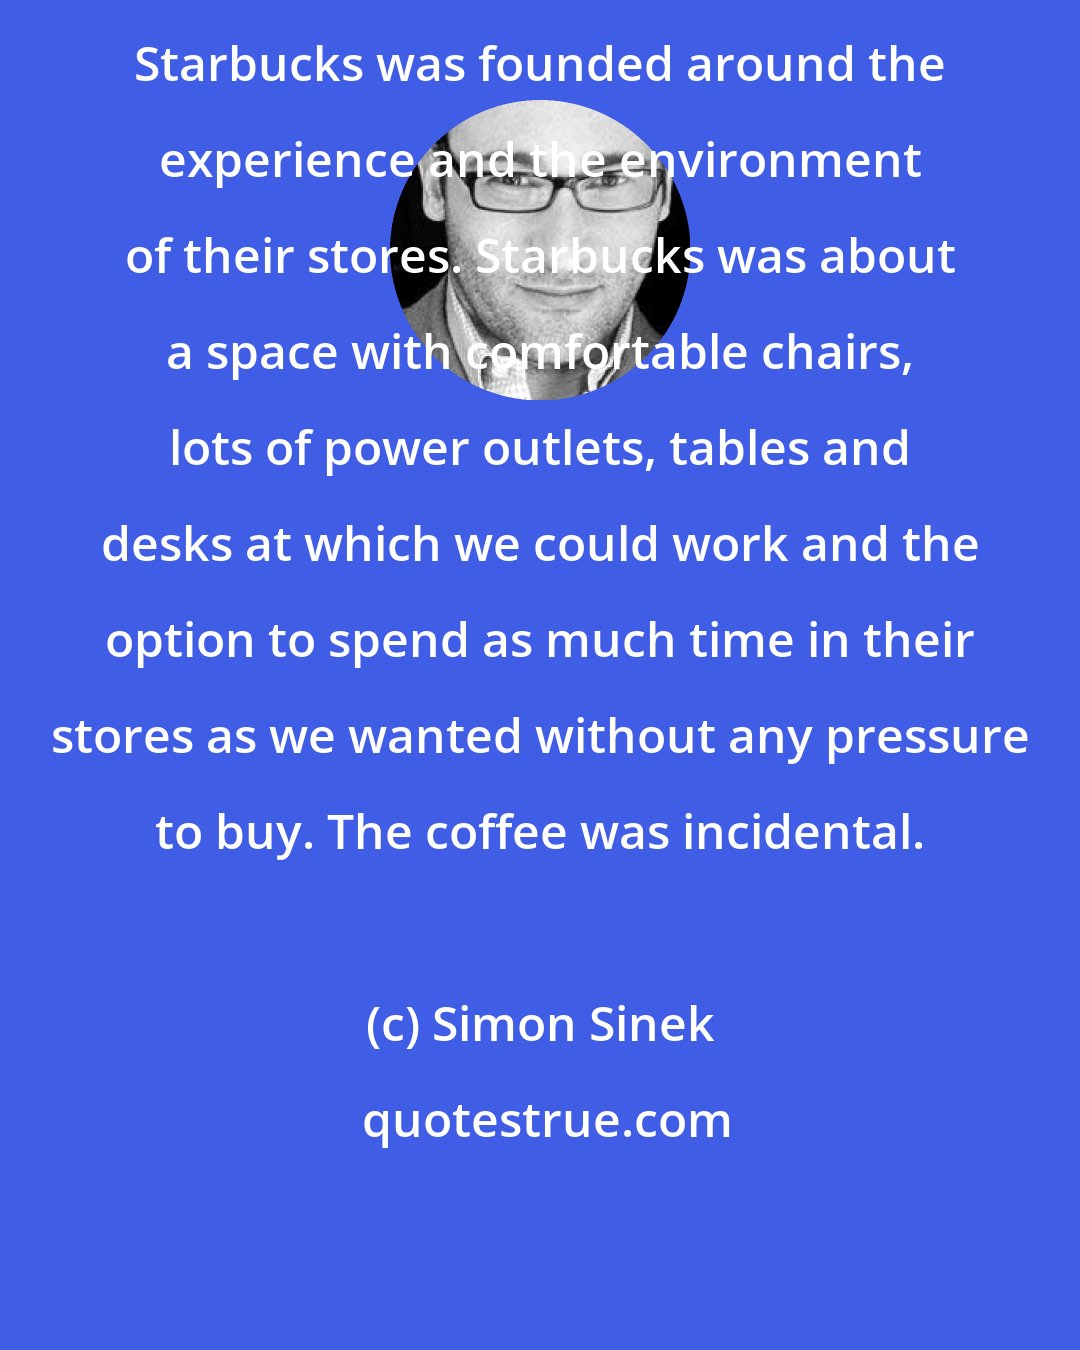 Simon Sinek: Starbucks was founded around the experience and the environment of their stores. Starbucks was about a space with comfortable chairs, lots of power outlets, tables and desks at which we could work and the option to spend as much time in their stores as we wanted without any pressure to buy. The coffee was incidental.